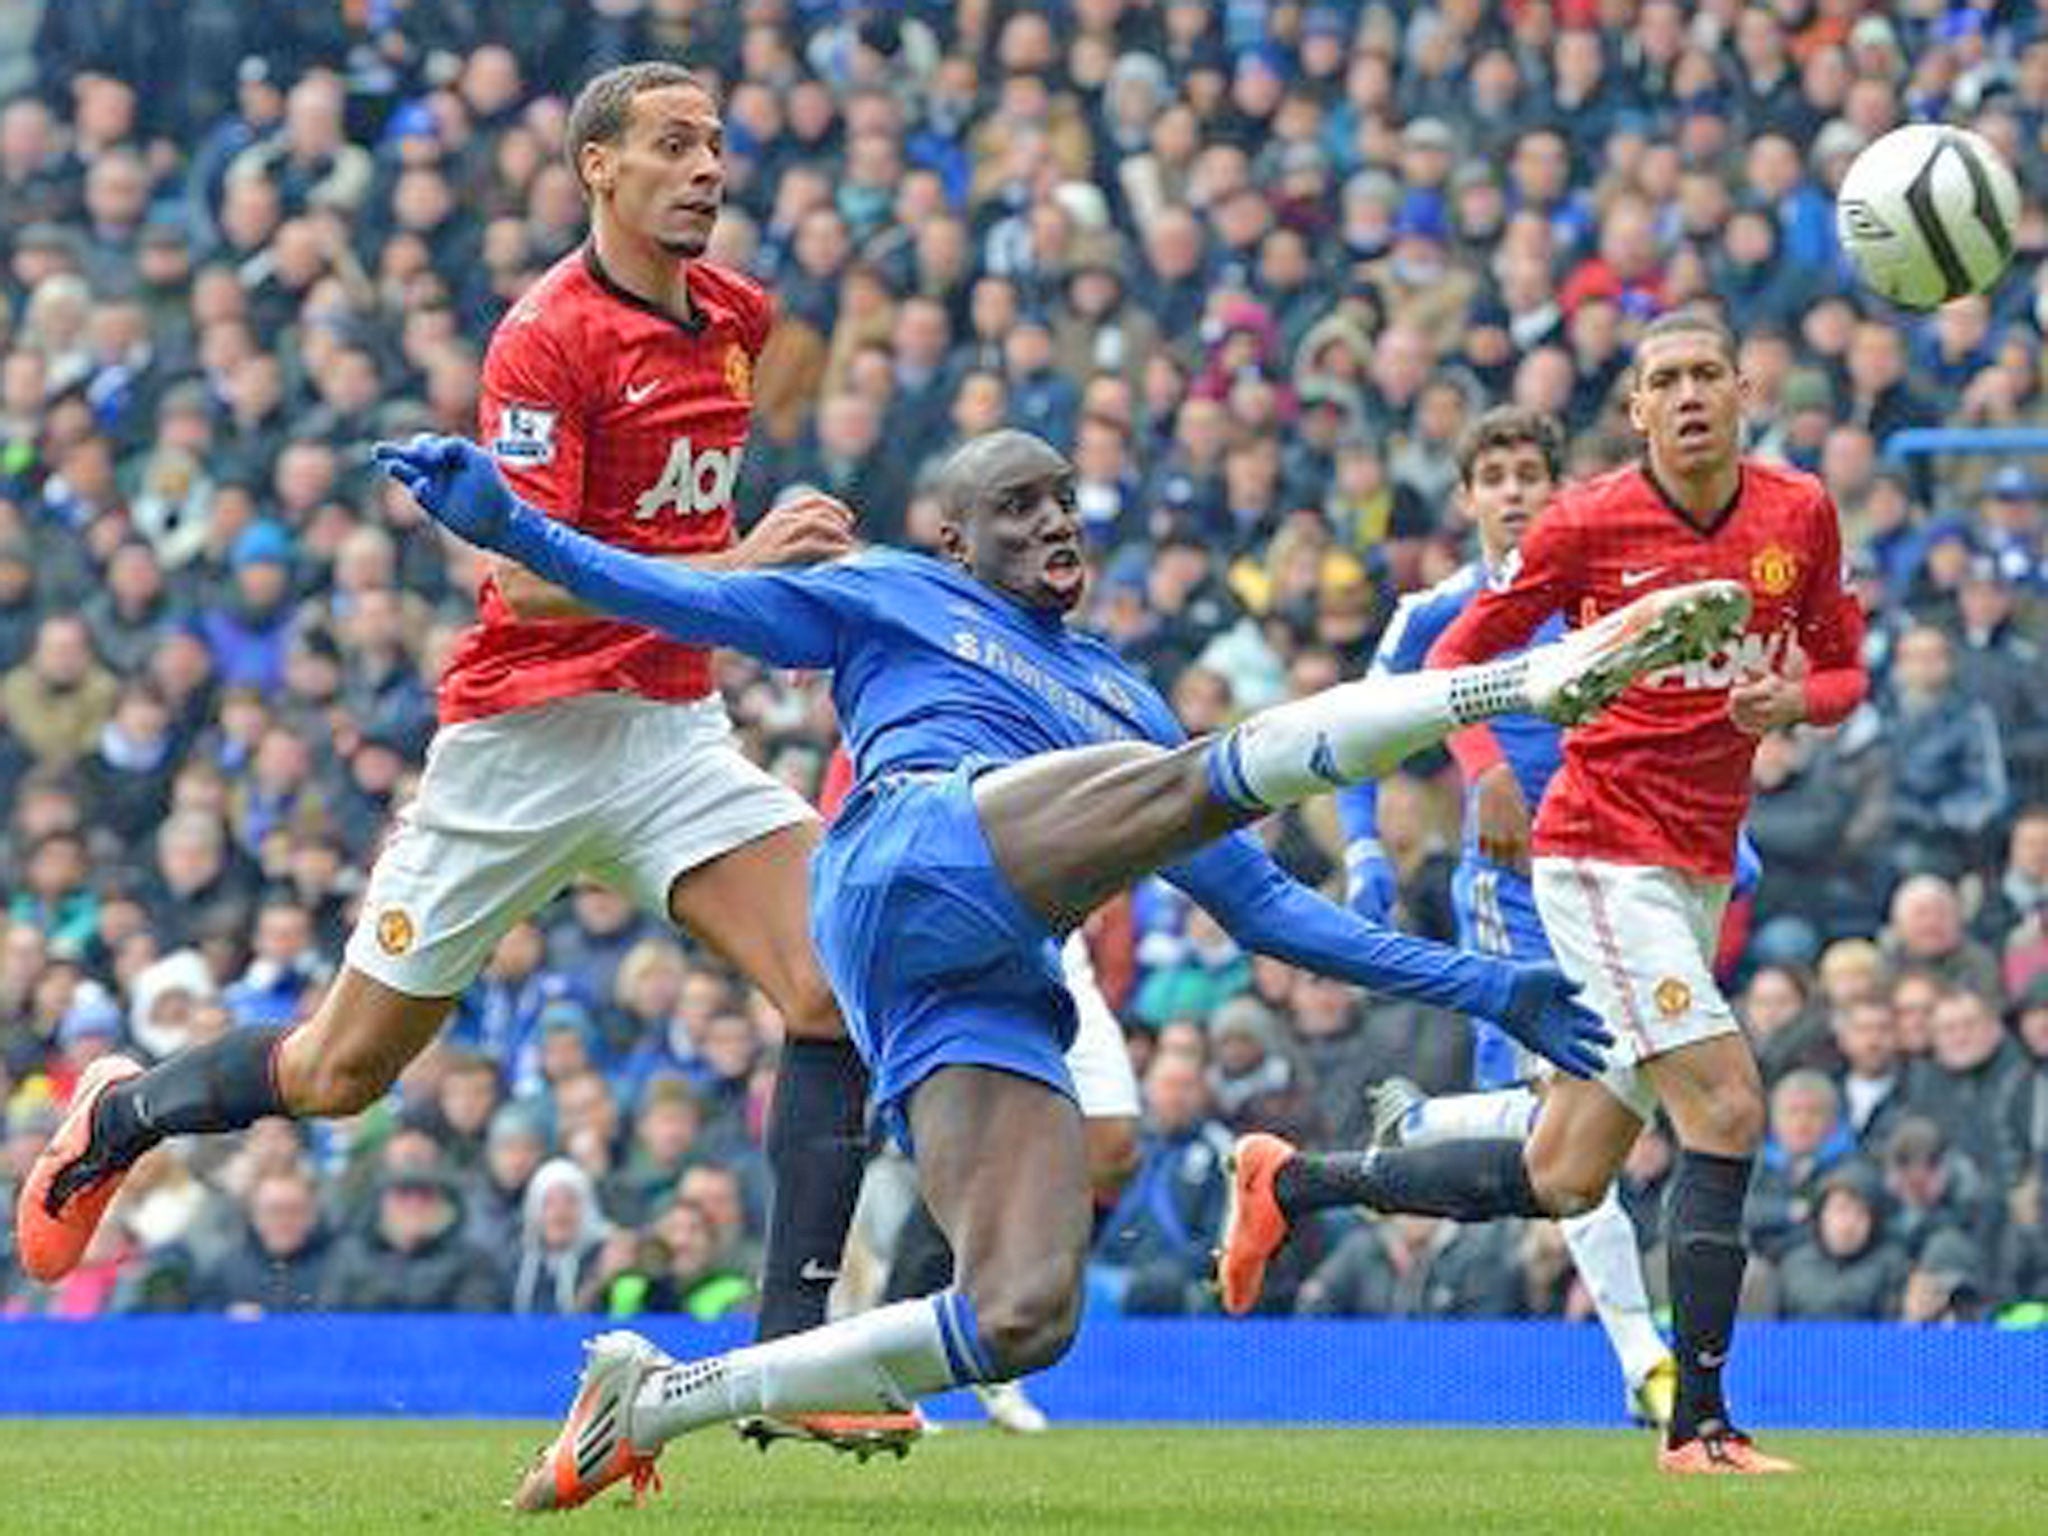 Chelsea’s Demba Ba clinches his side’s 1-0 FA Cup victory over United